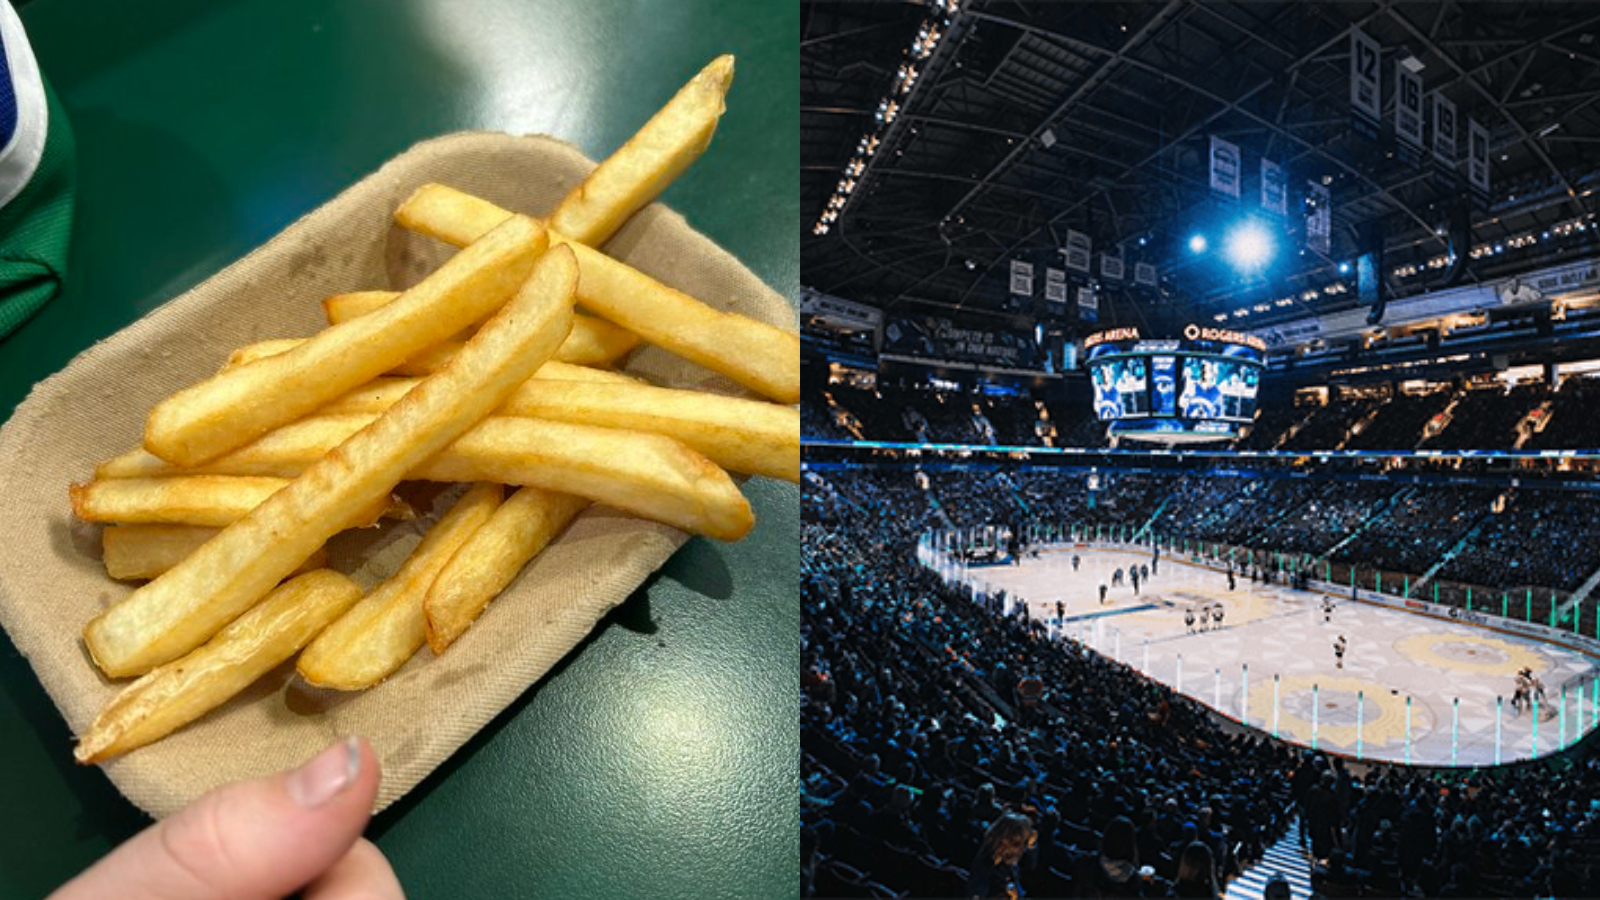 Sports fans sickened by arena's “criminal” $8 price for 15 fries ...